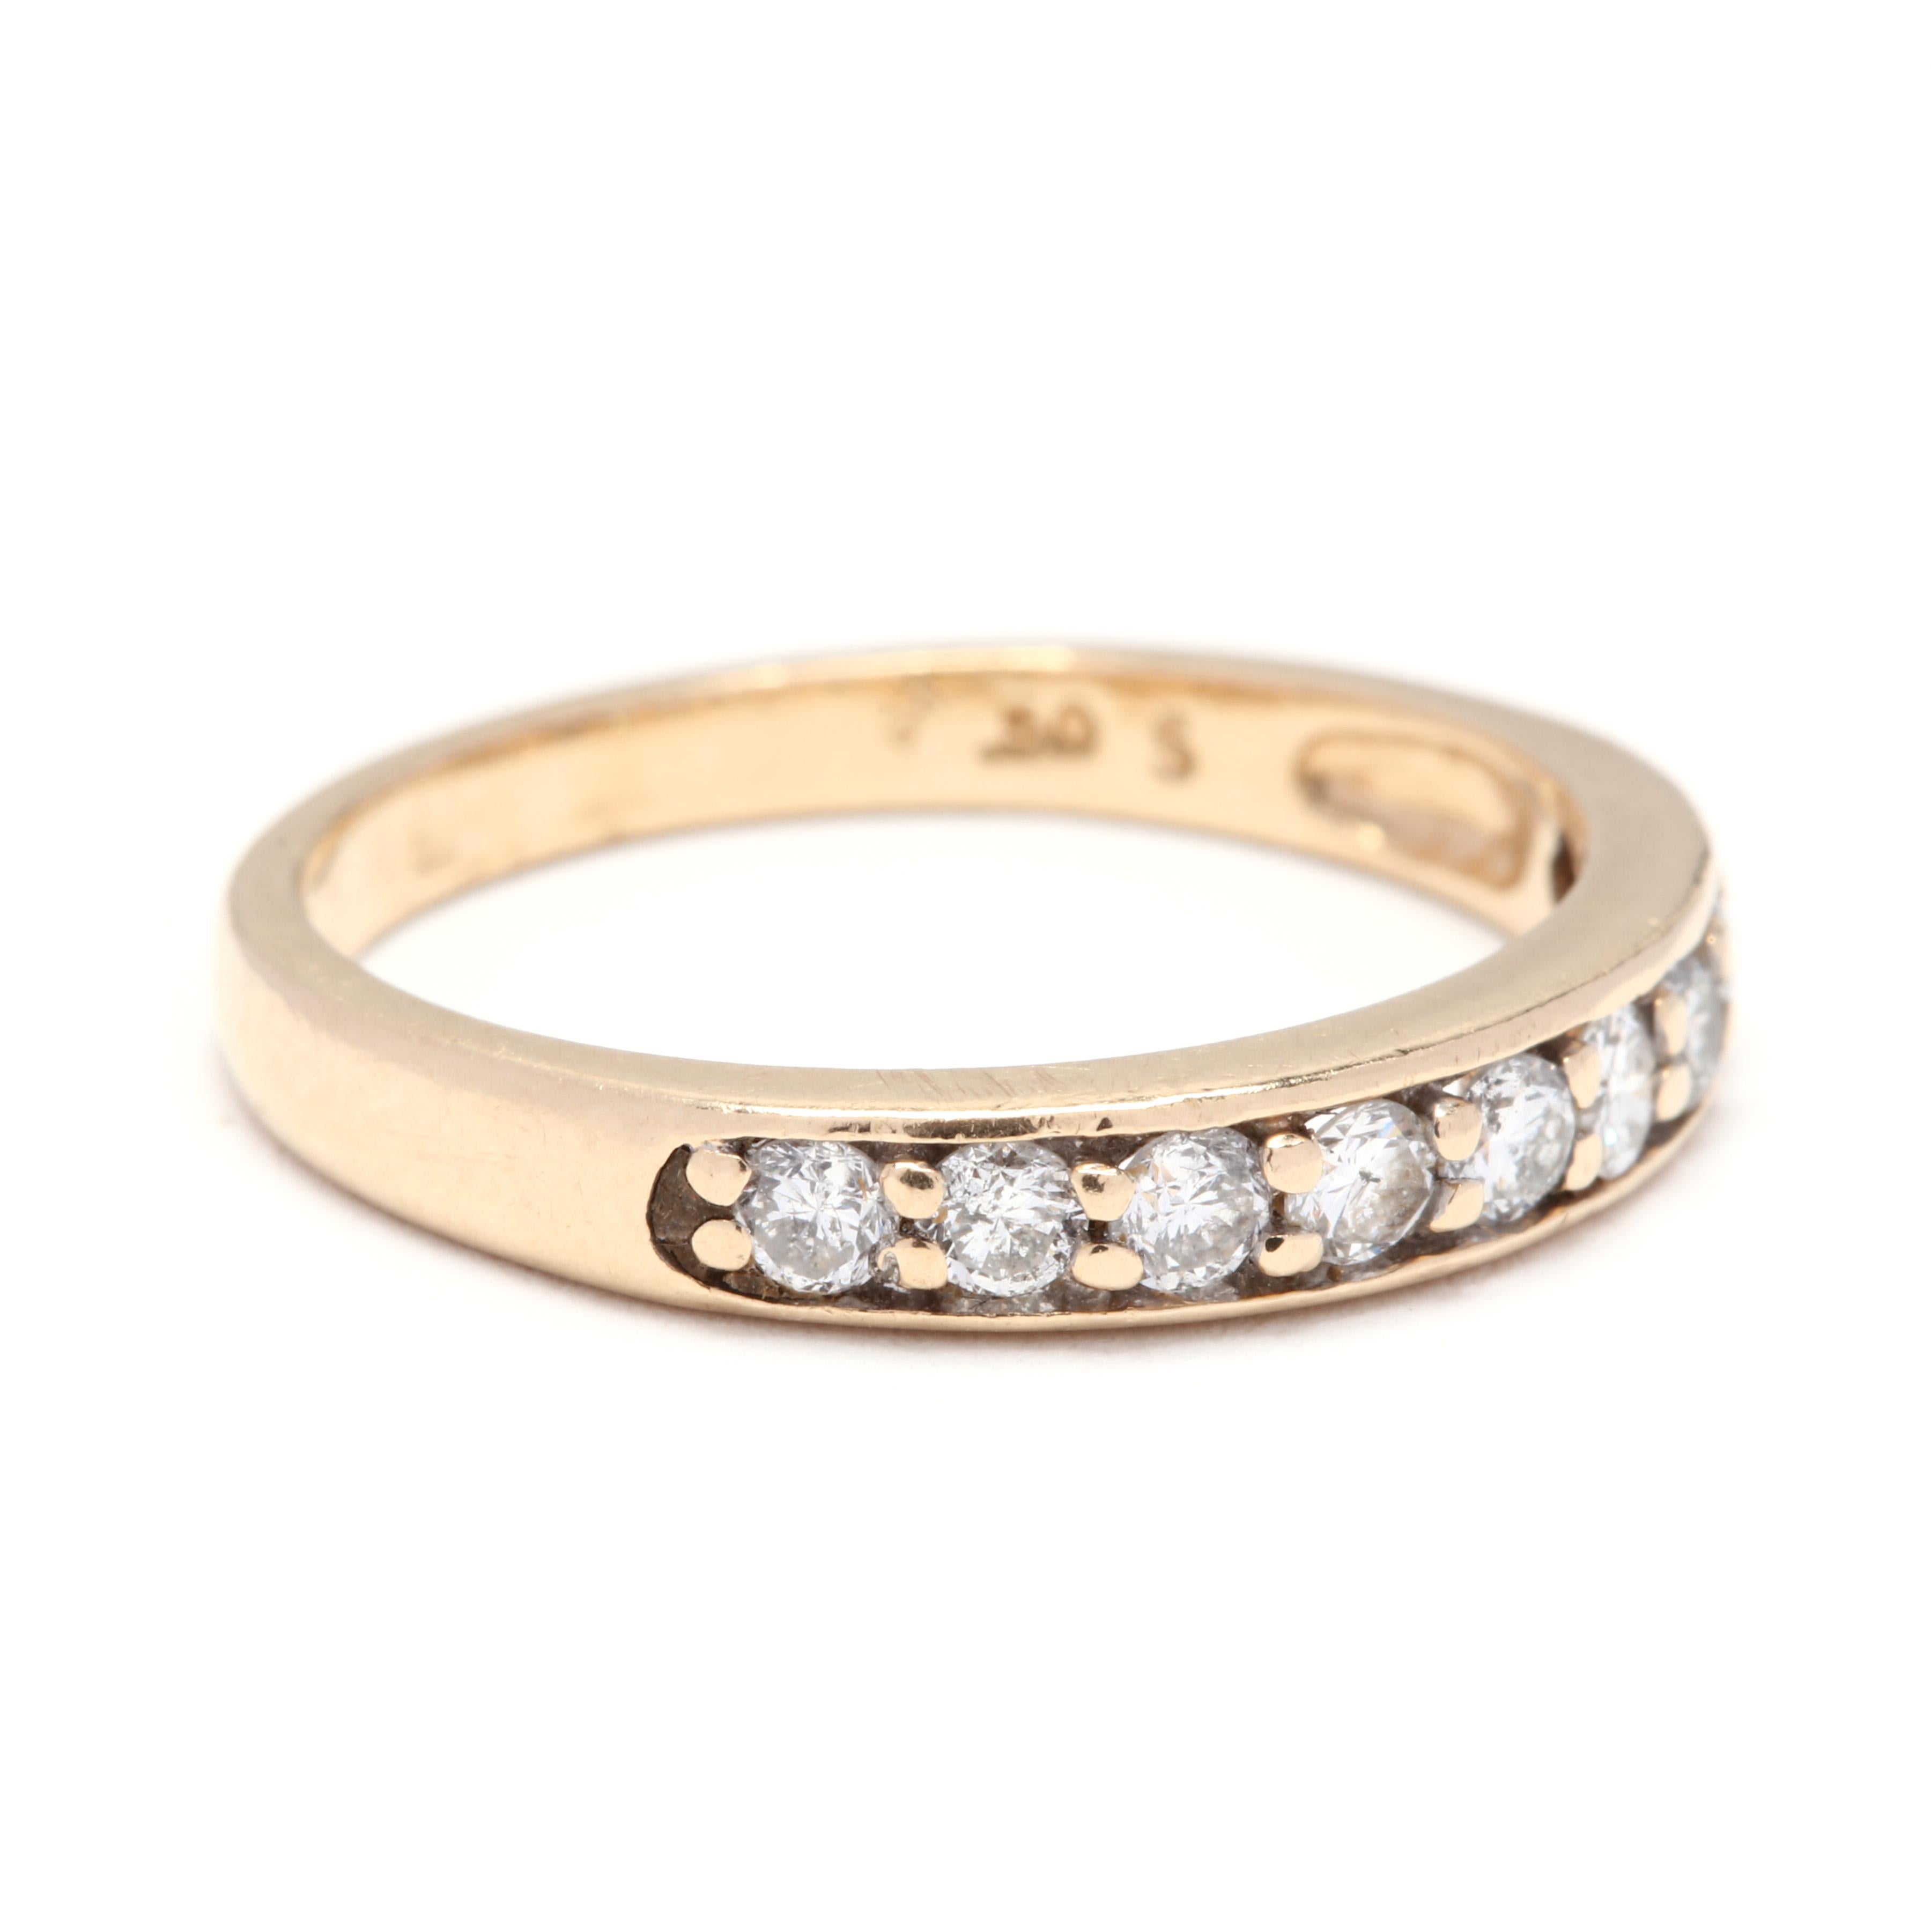 A 14 karat yellow gold and diamond stackable wedding band ring. This ring features a tapered design set with full cut round diamonds weighing approximately .54 total carats.

Stones:
- diamonds, 9 stones
- full cut round
- 2 - 2.5 mm
- approximately